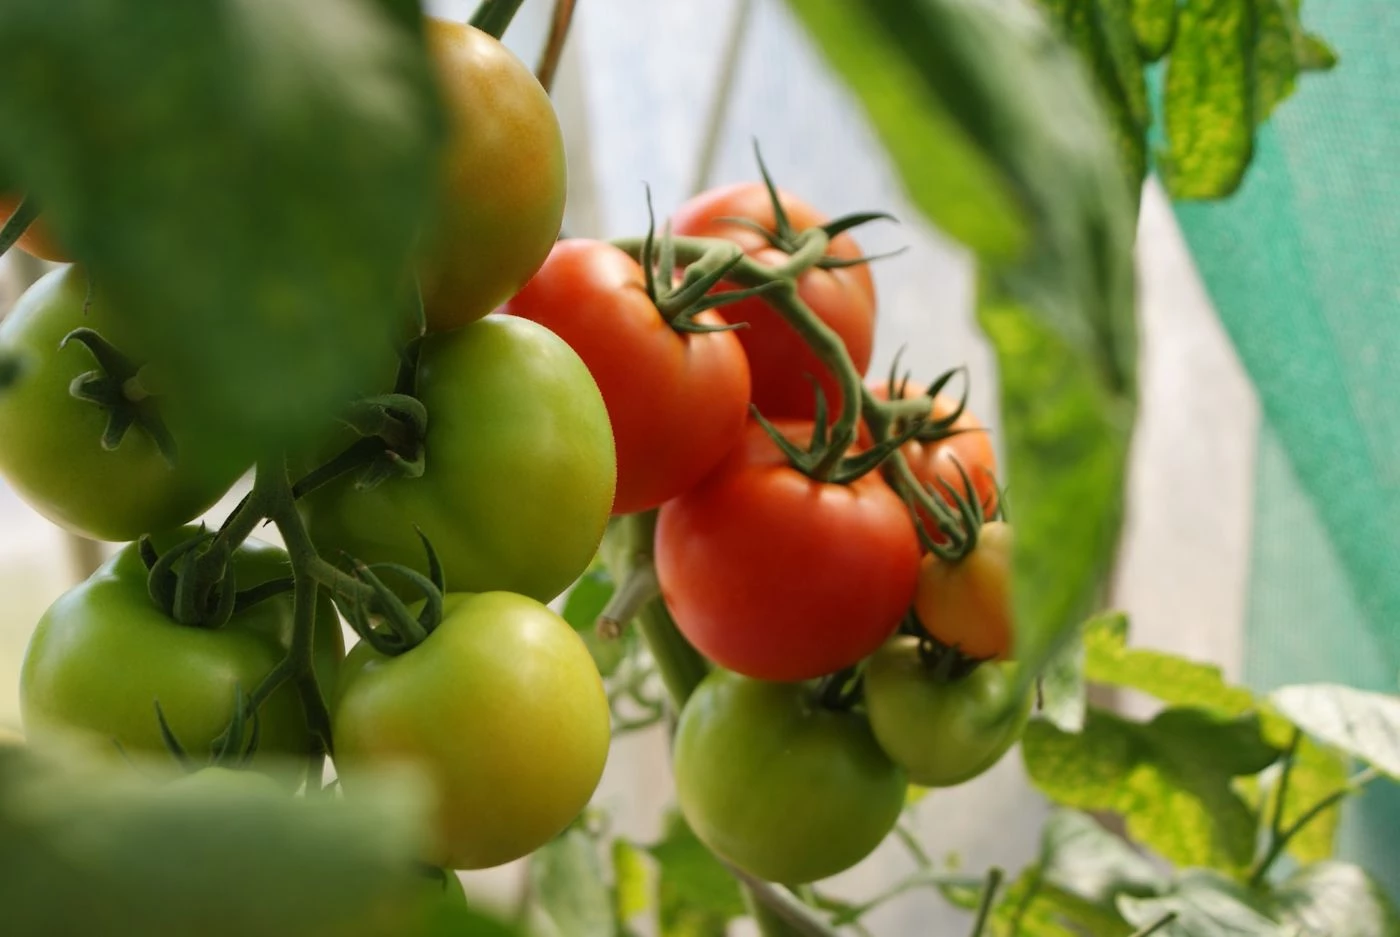 an image of ripe and unripe tomatoes